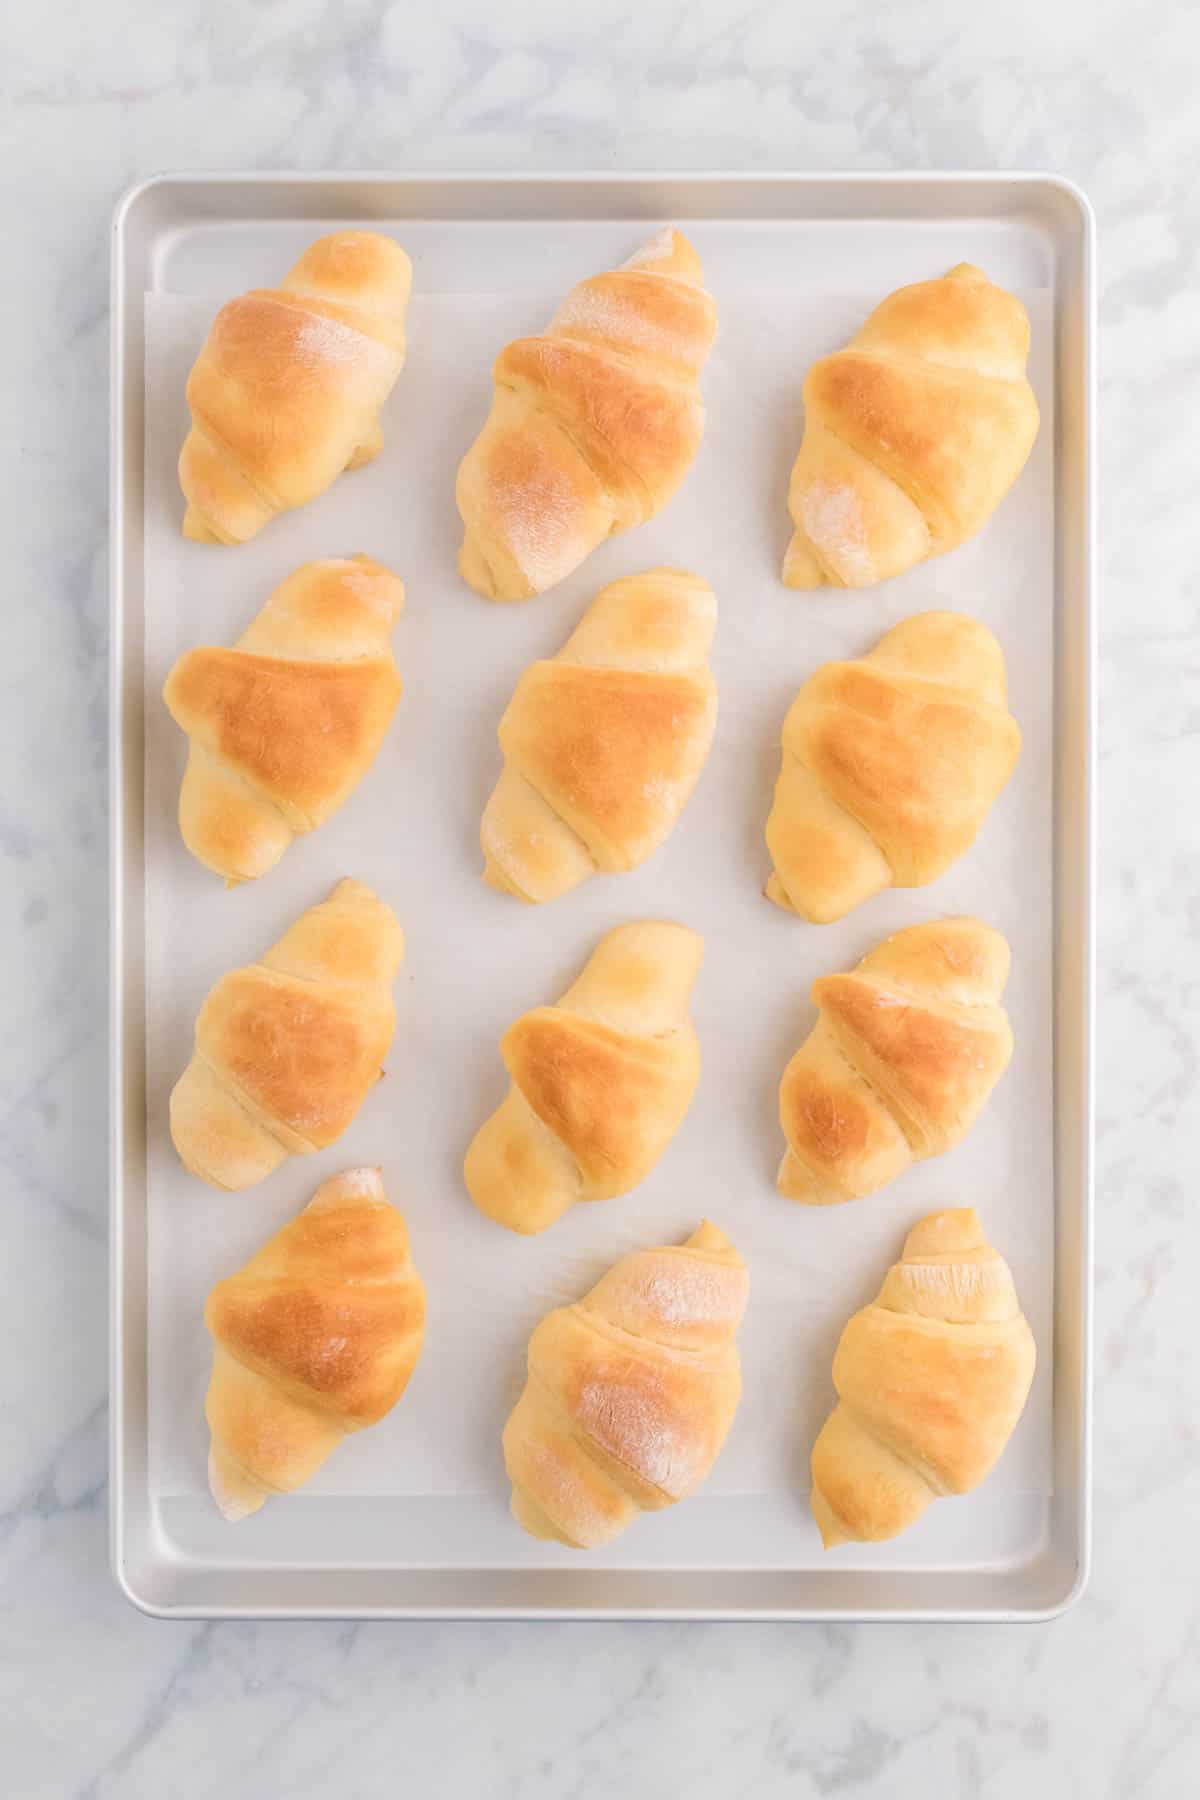 Top view of a baking tray with freshly baked crescent rolls. 